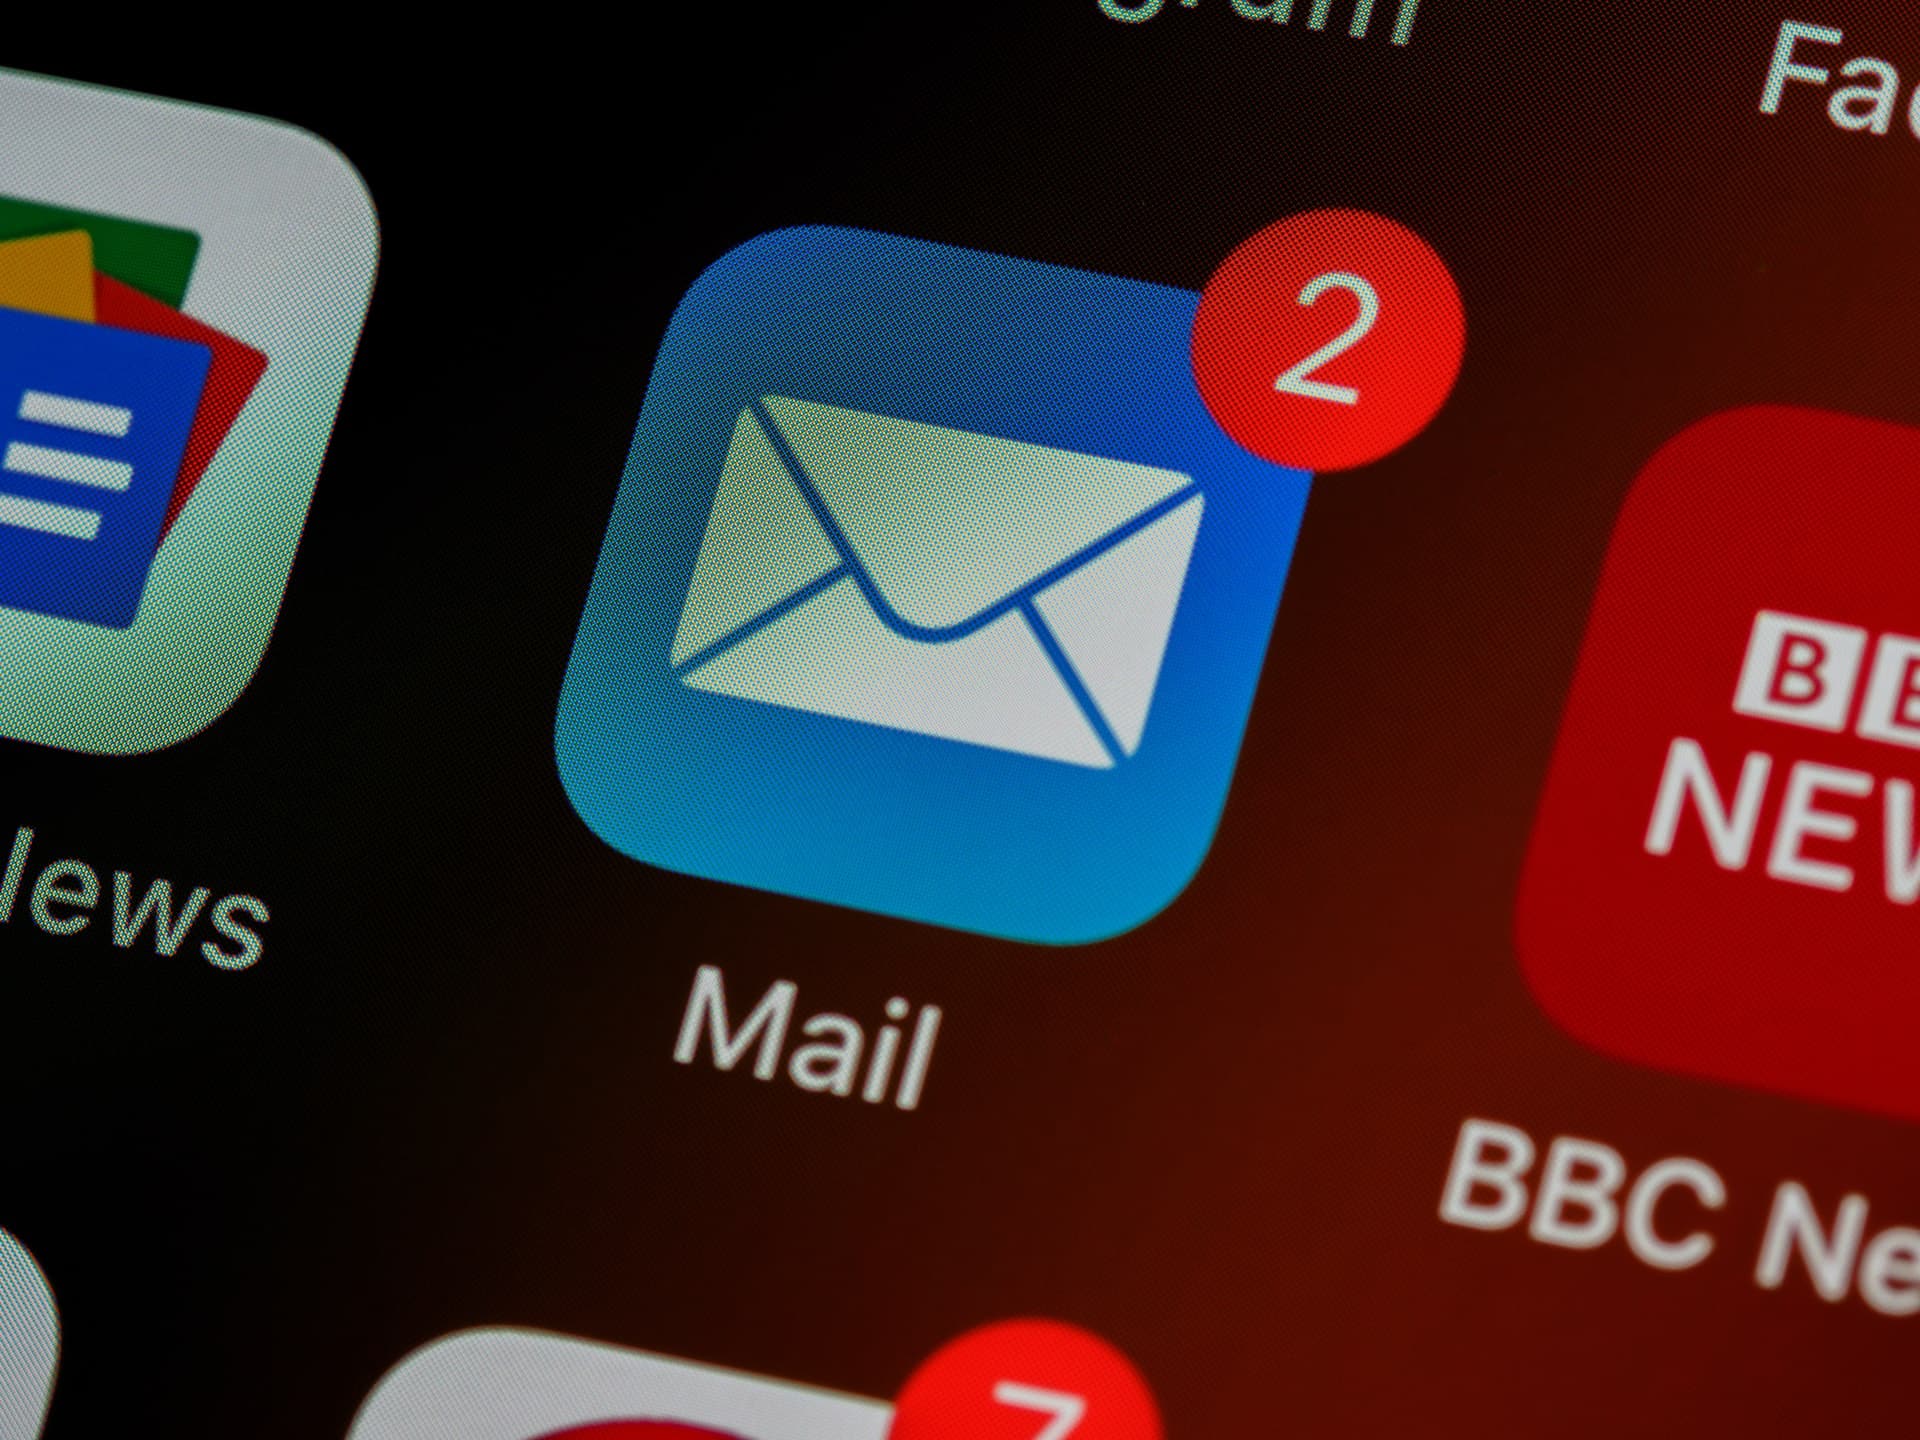 The image shows a blue-and-white logo of the Mail app to illustrate the concept of mass mailing.